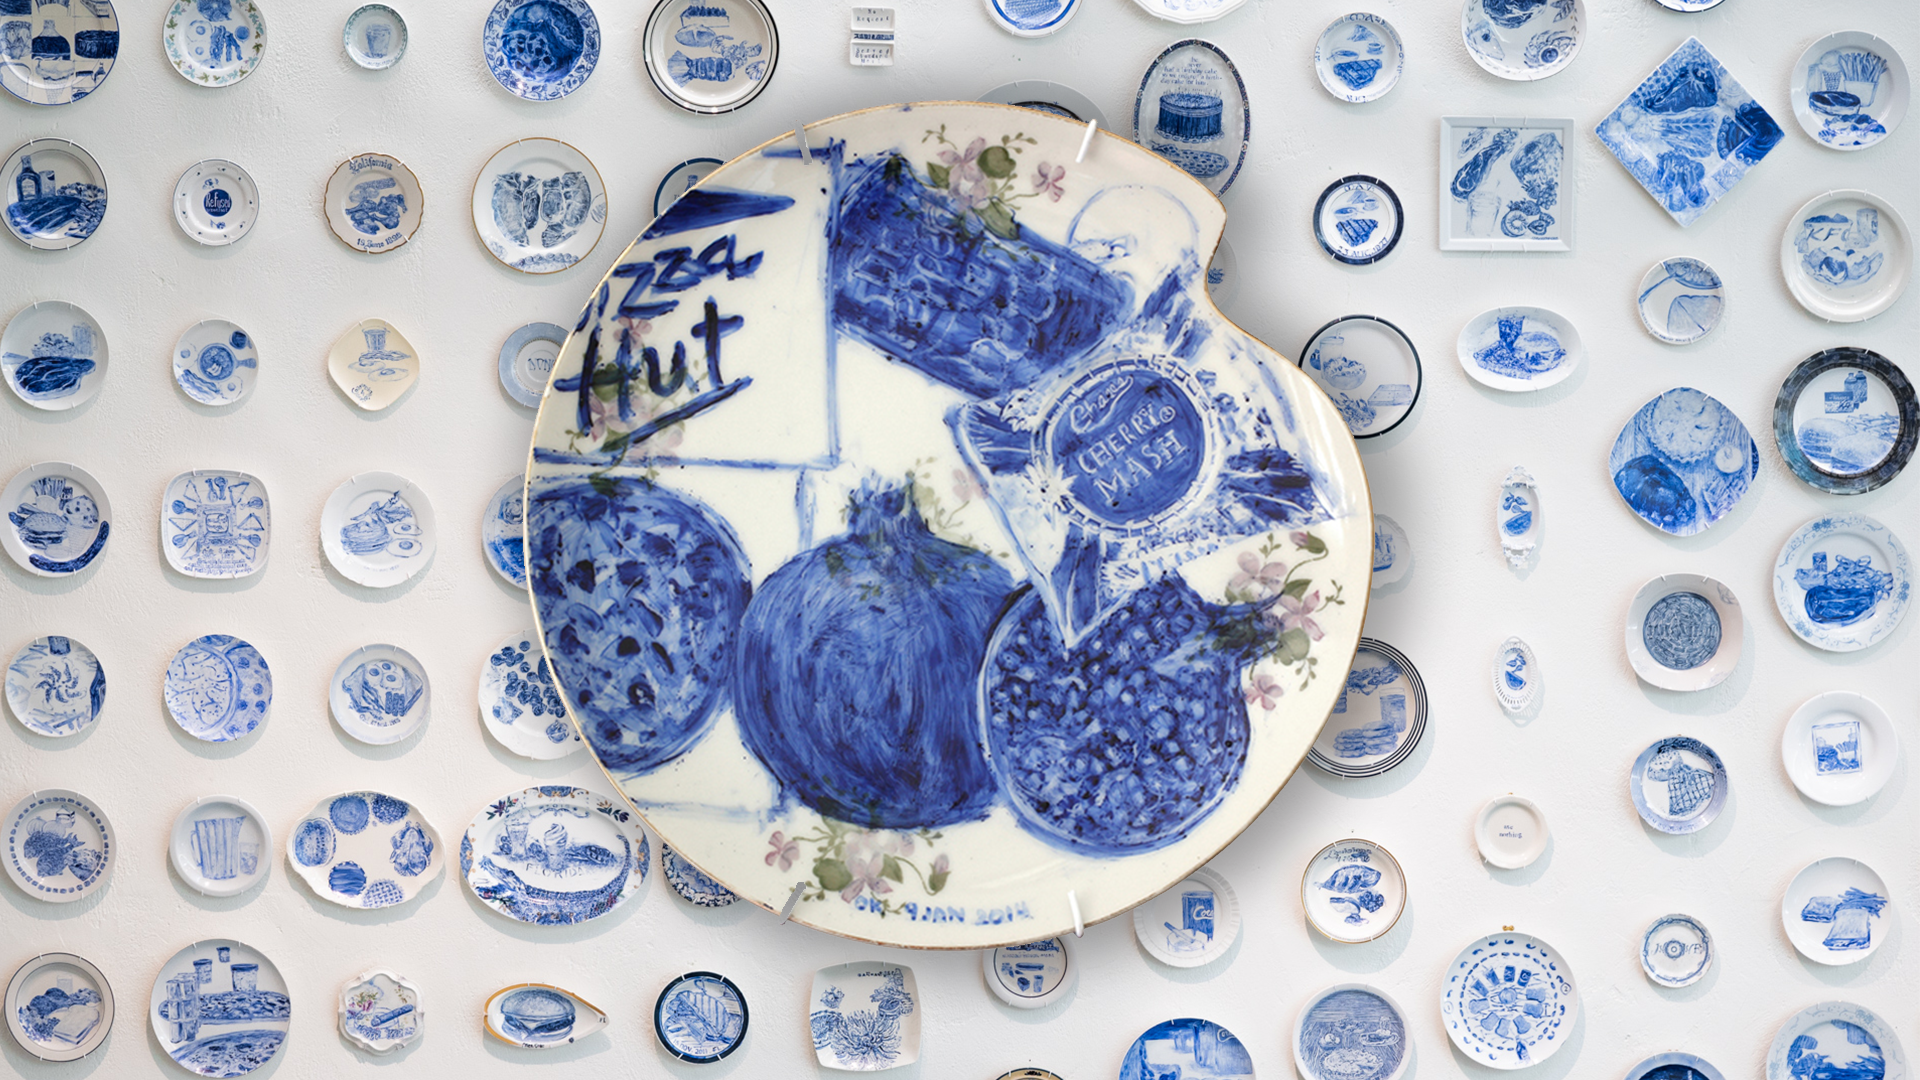 800 plates memorialize inmates' last meals and bring empathy and enlightenment to the issue of capital punishment. On view at Bellevue Art Museum through Oct, 2021.